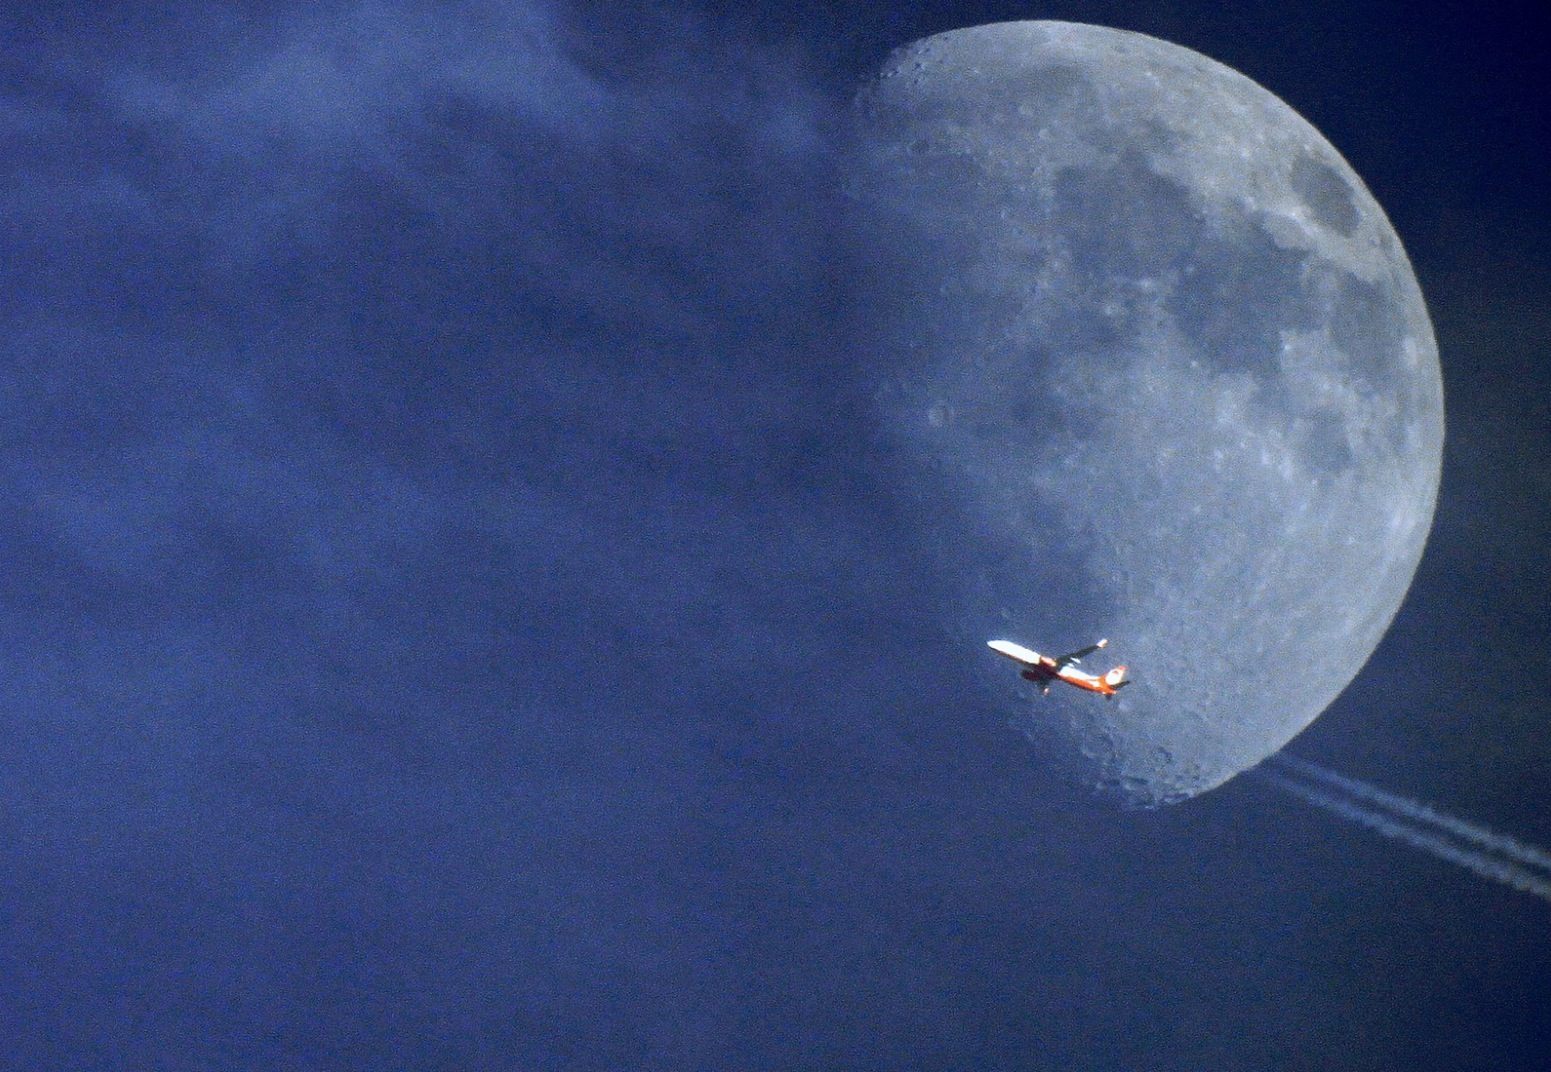 Just The Right Moment: Capturing Planes With The Sun And Moon